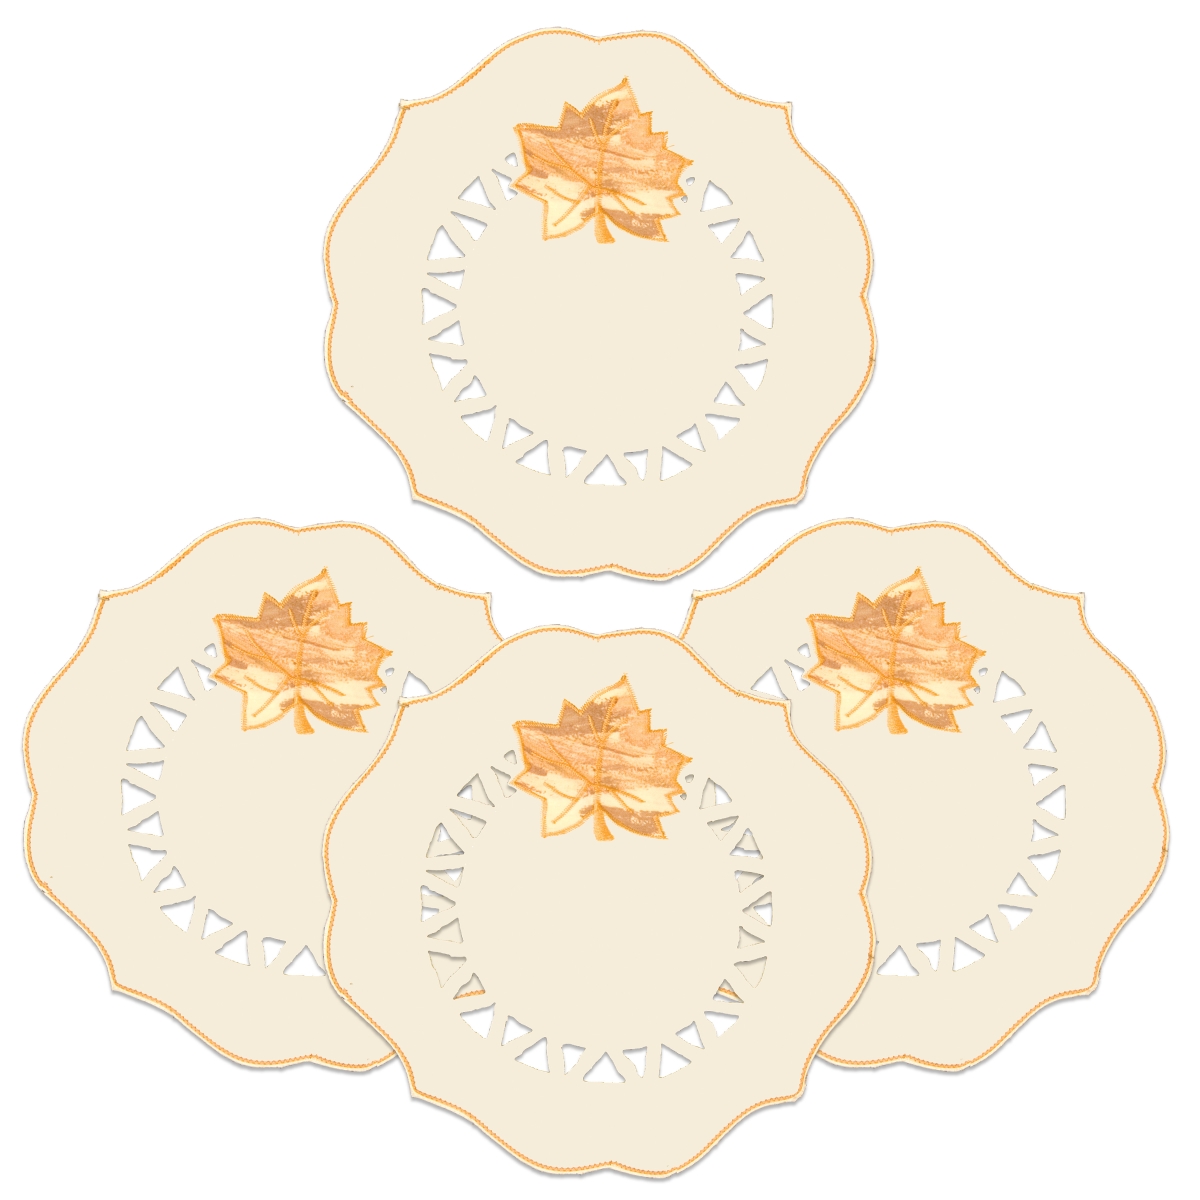 Picture of Heritage Lace HS-1200C-S 12 in. Harvest Sheer Round Doilies, Cream - Set of 4